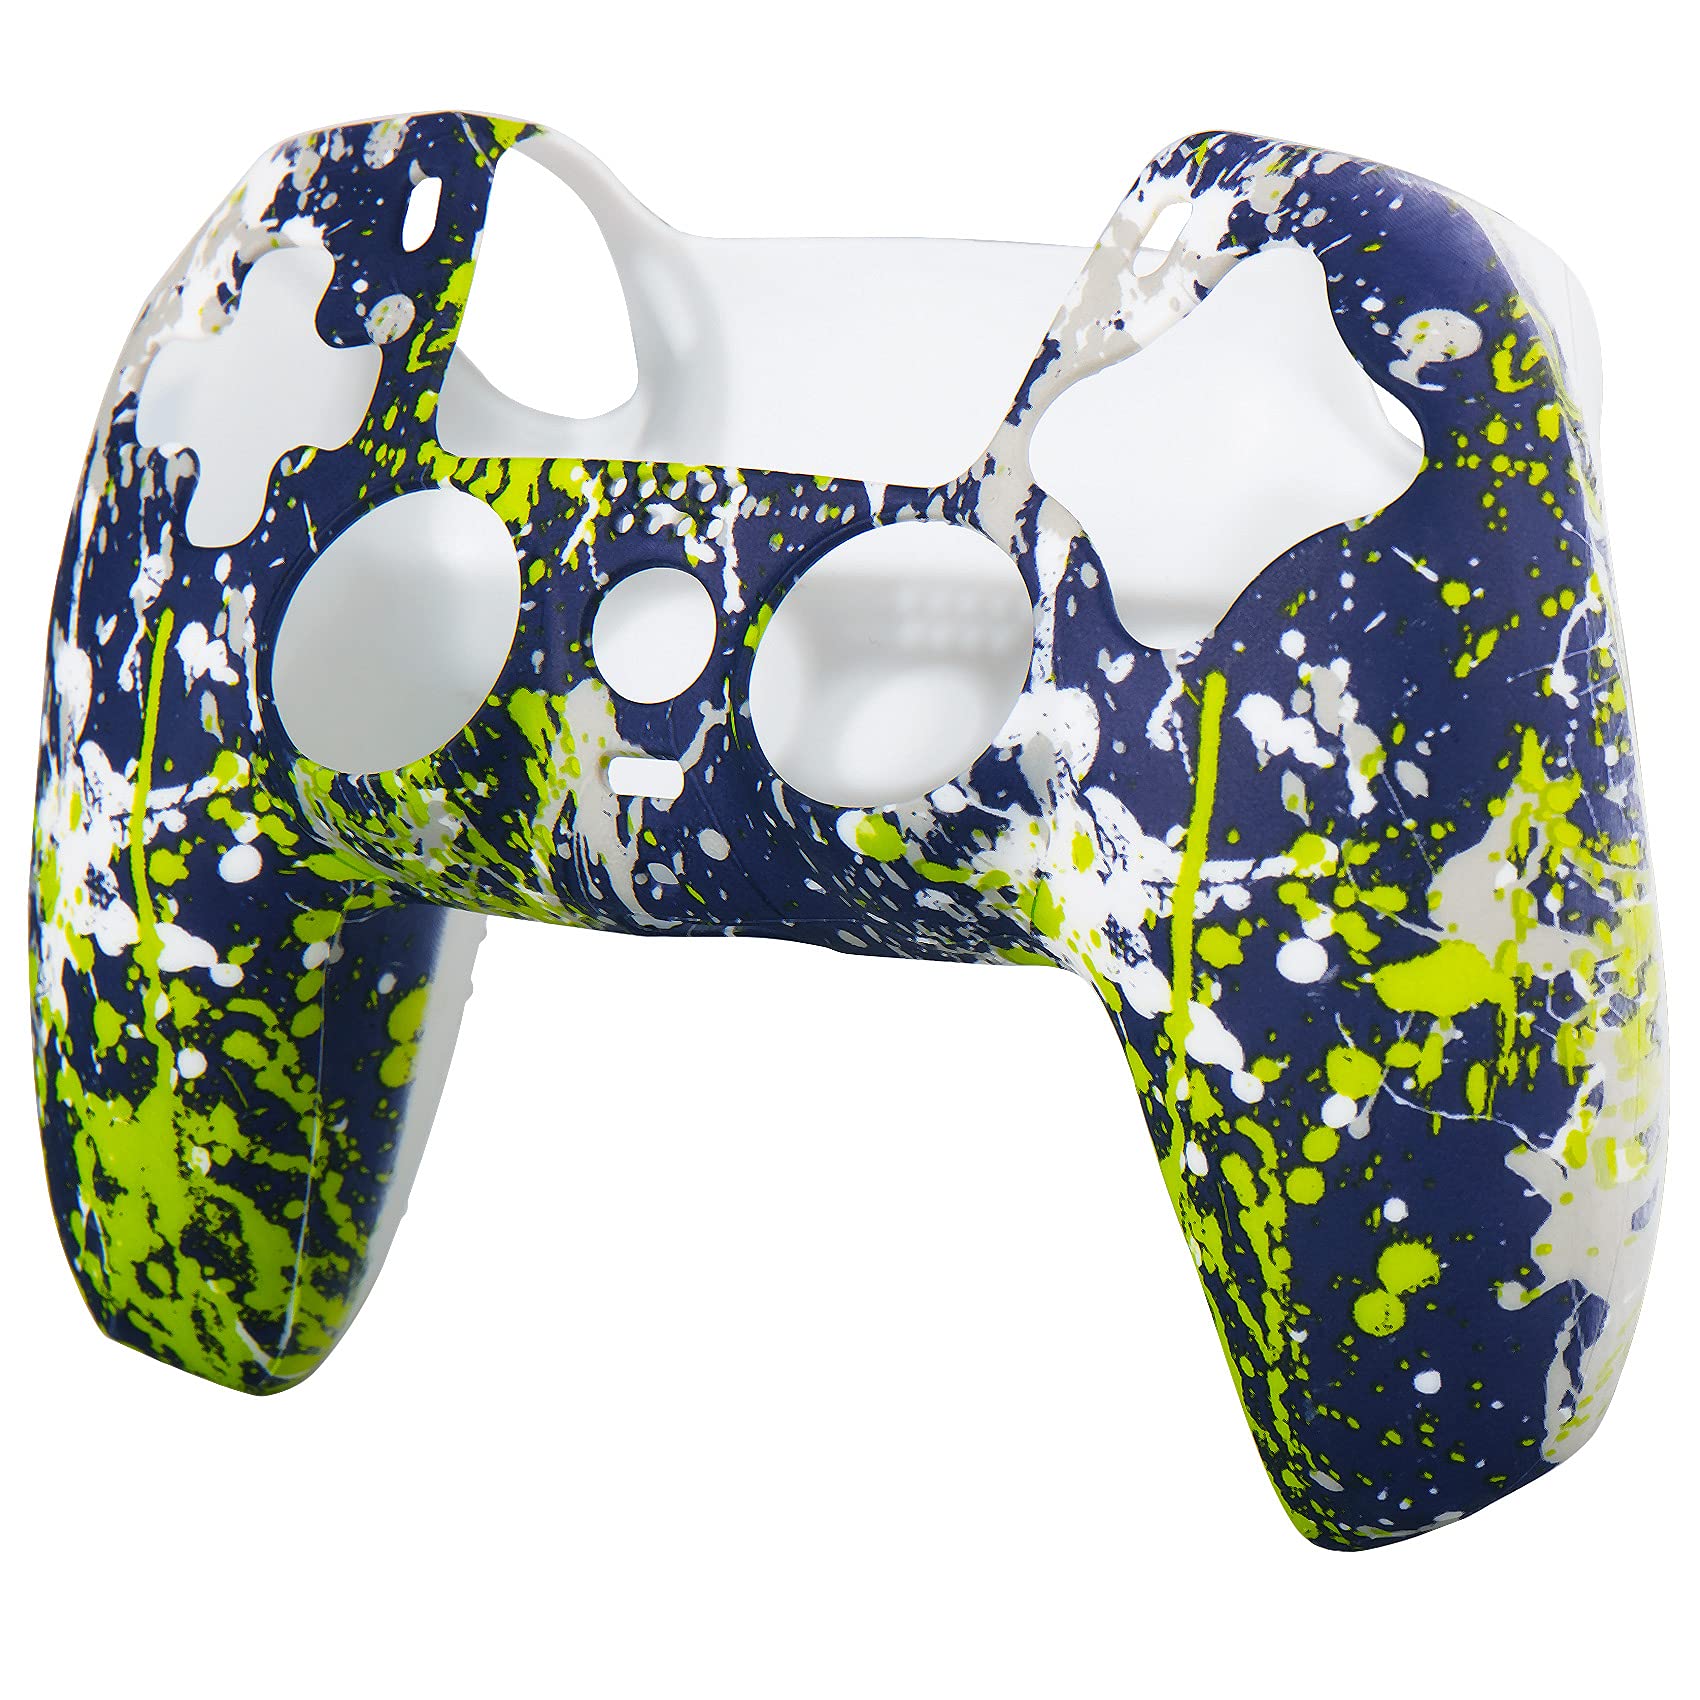 9CDeer 1 Piece of Silicone Transfer Print Protective Cover Skin + 10 Thumb Grips for Playstation 5 / PS5 Controller Green Graffiti